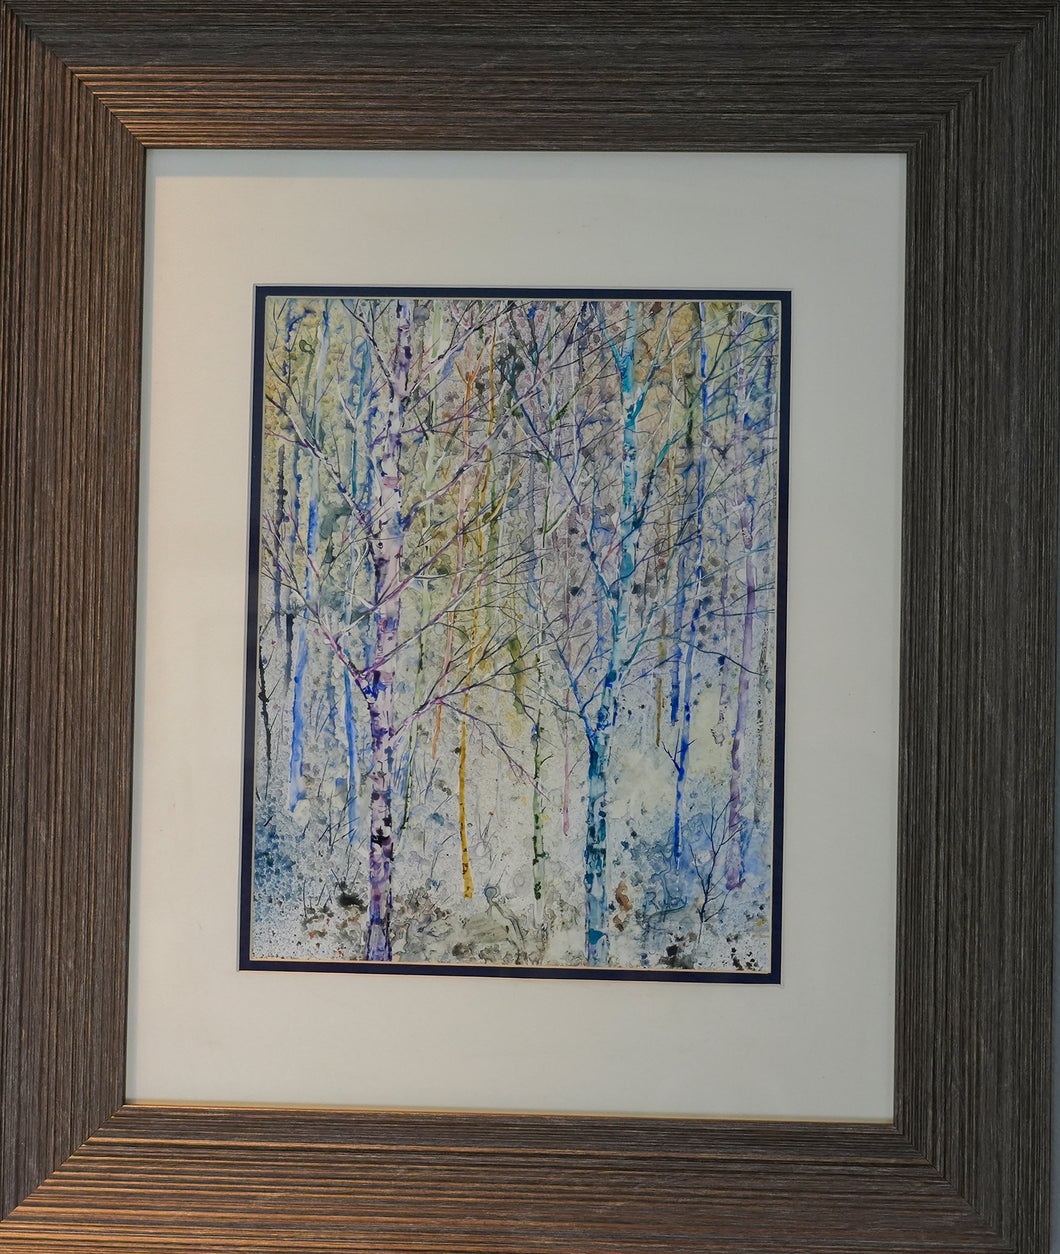 *Nature's Forest Palette (21 x 25 inch framed